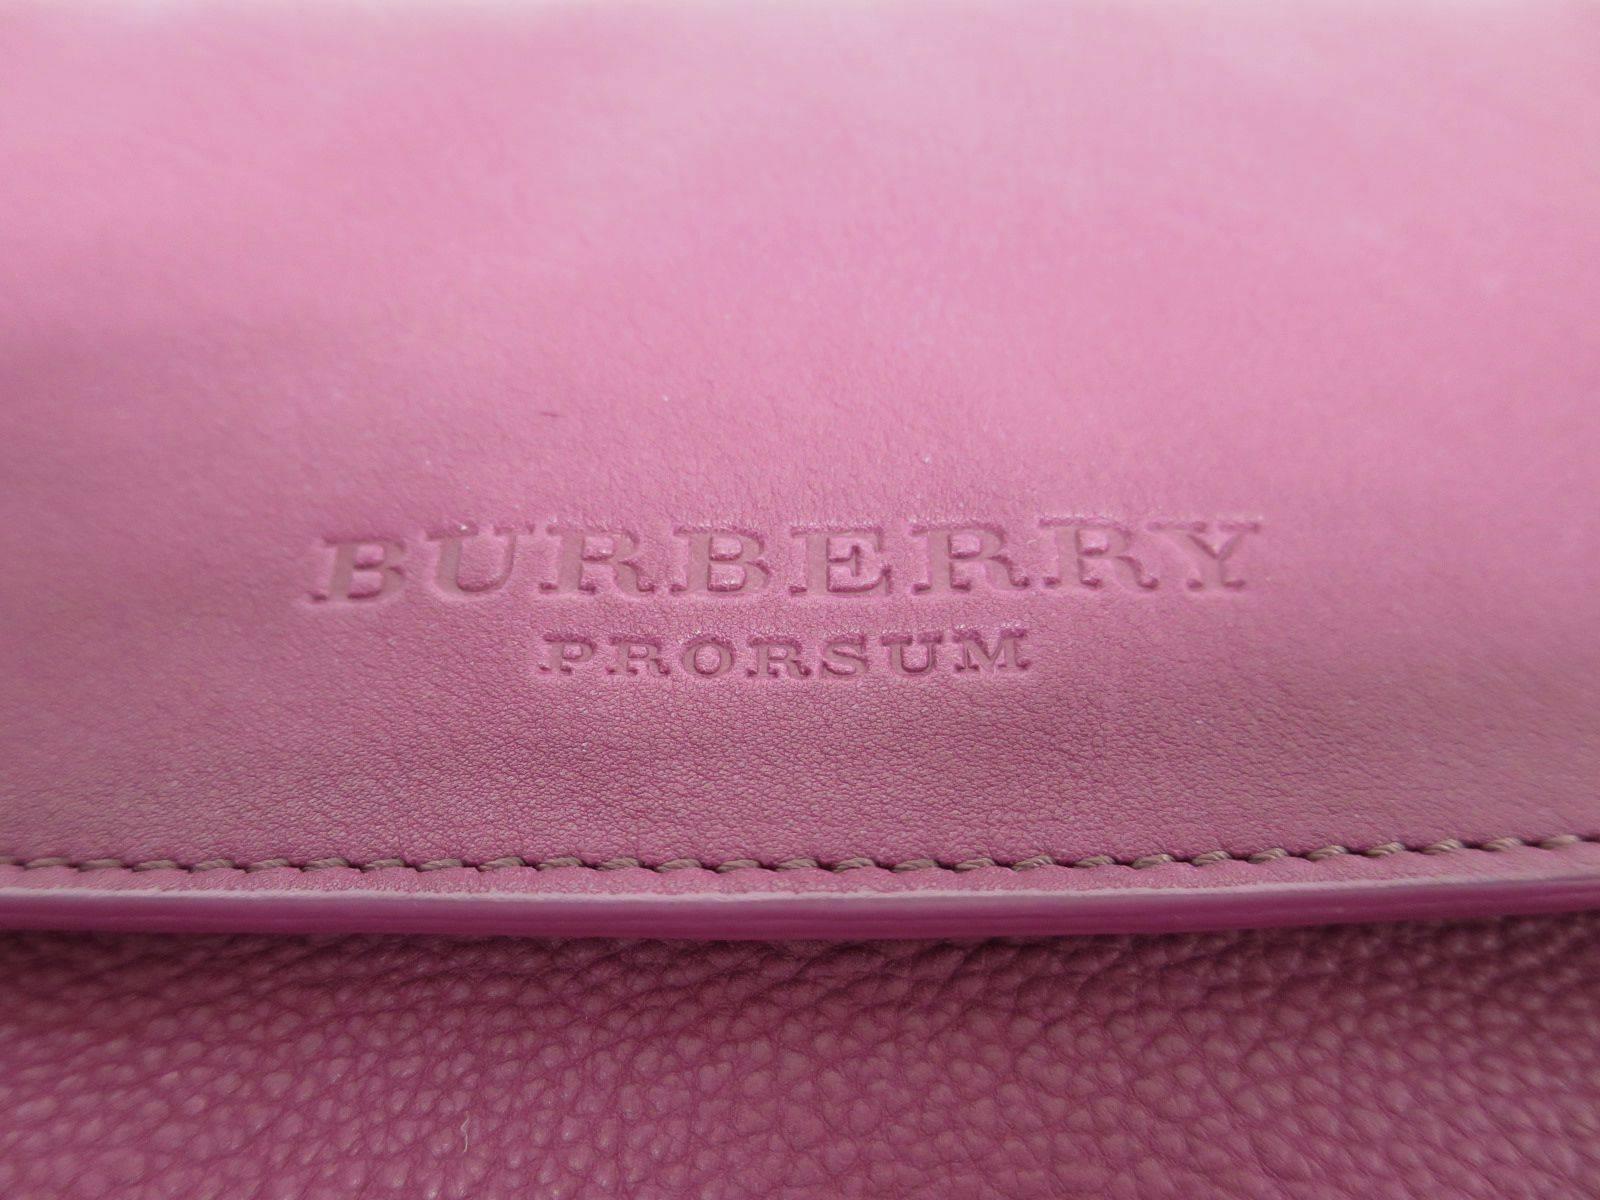 CURATOR'S NOTES

Spice your favorite LBD (little black dress) with a pop of color!  This chic Burberry Prorsum fuchsia leather oversized foldover clutch bag fits the bill.

Leather
Magnet closure
Made in Italy
Measures 14